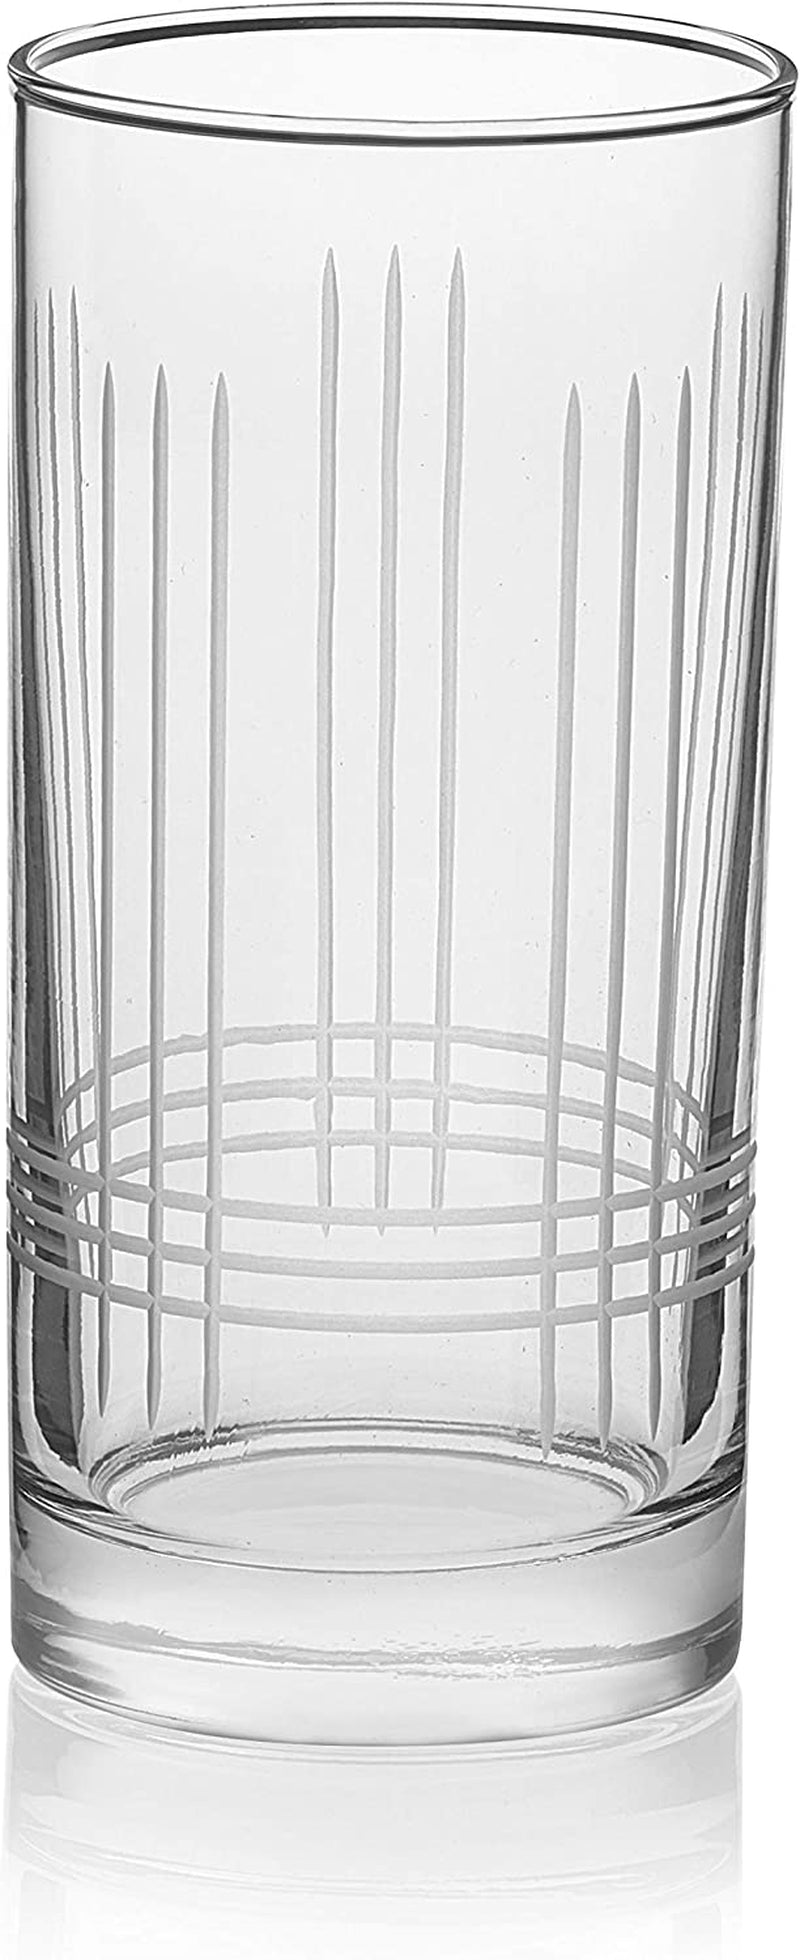 Libbey Cut Cocktails Scribe Tumbler Glasses, 15-Ounce, Set of 8